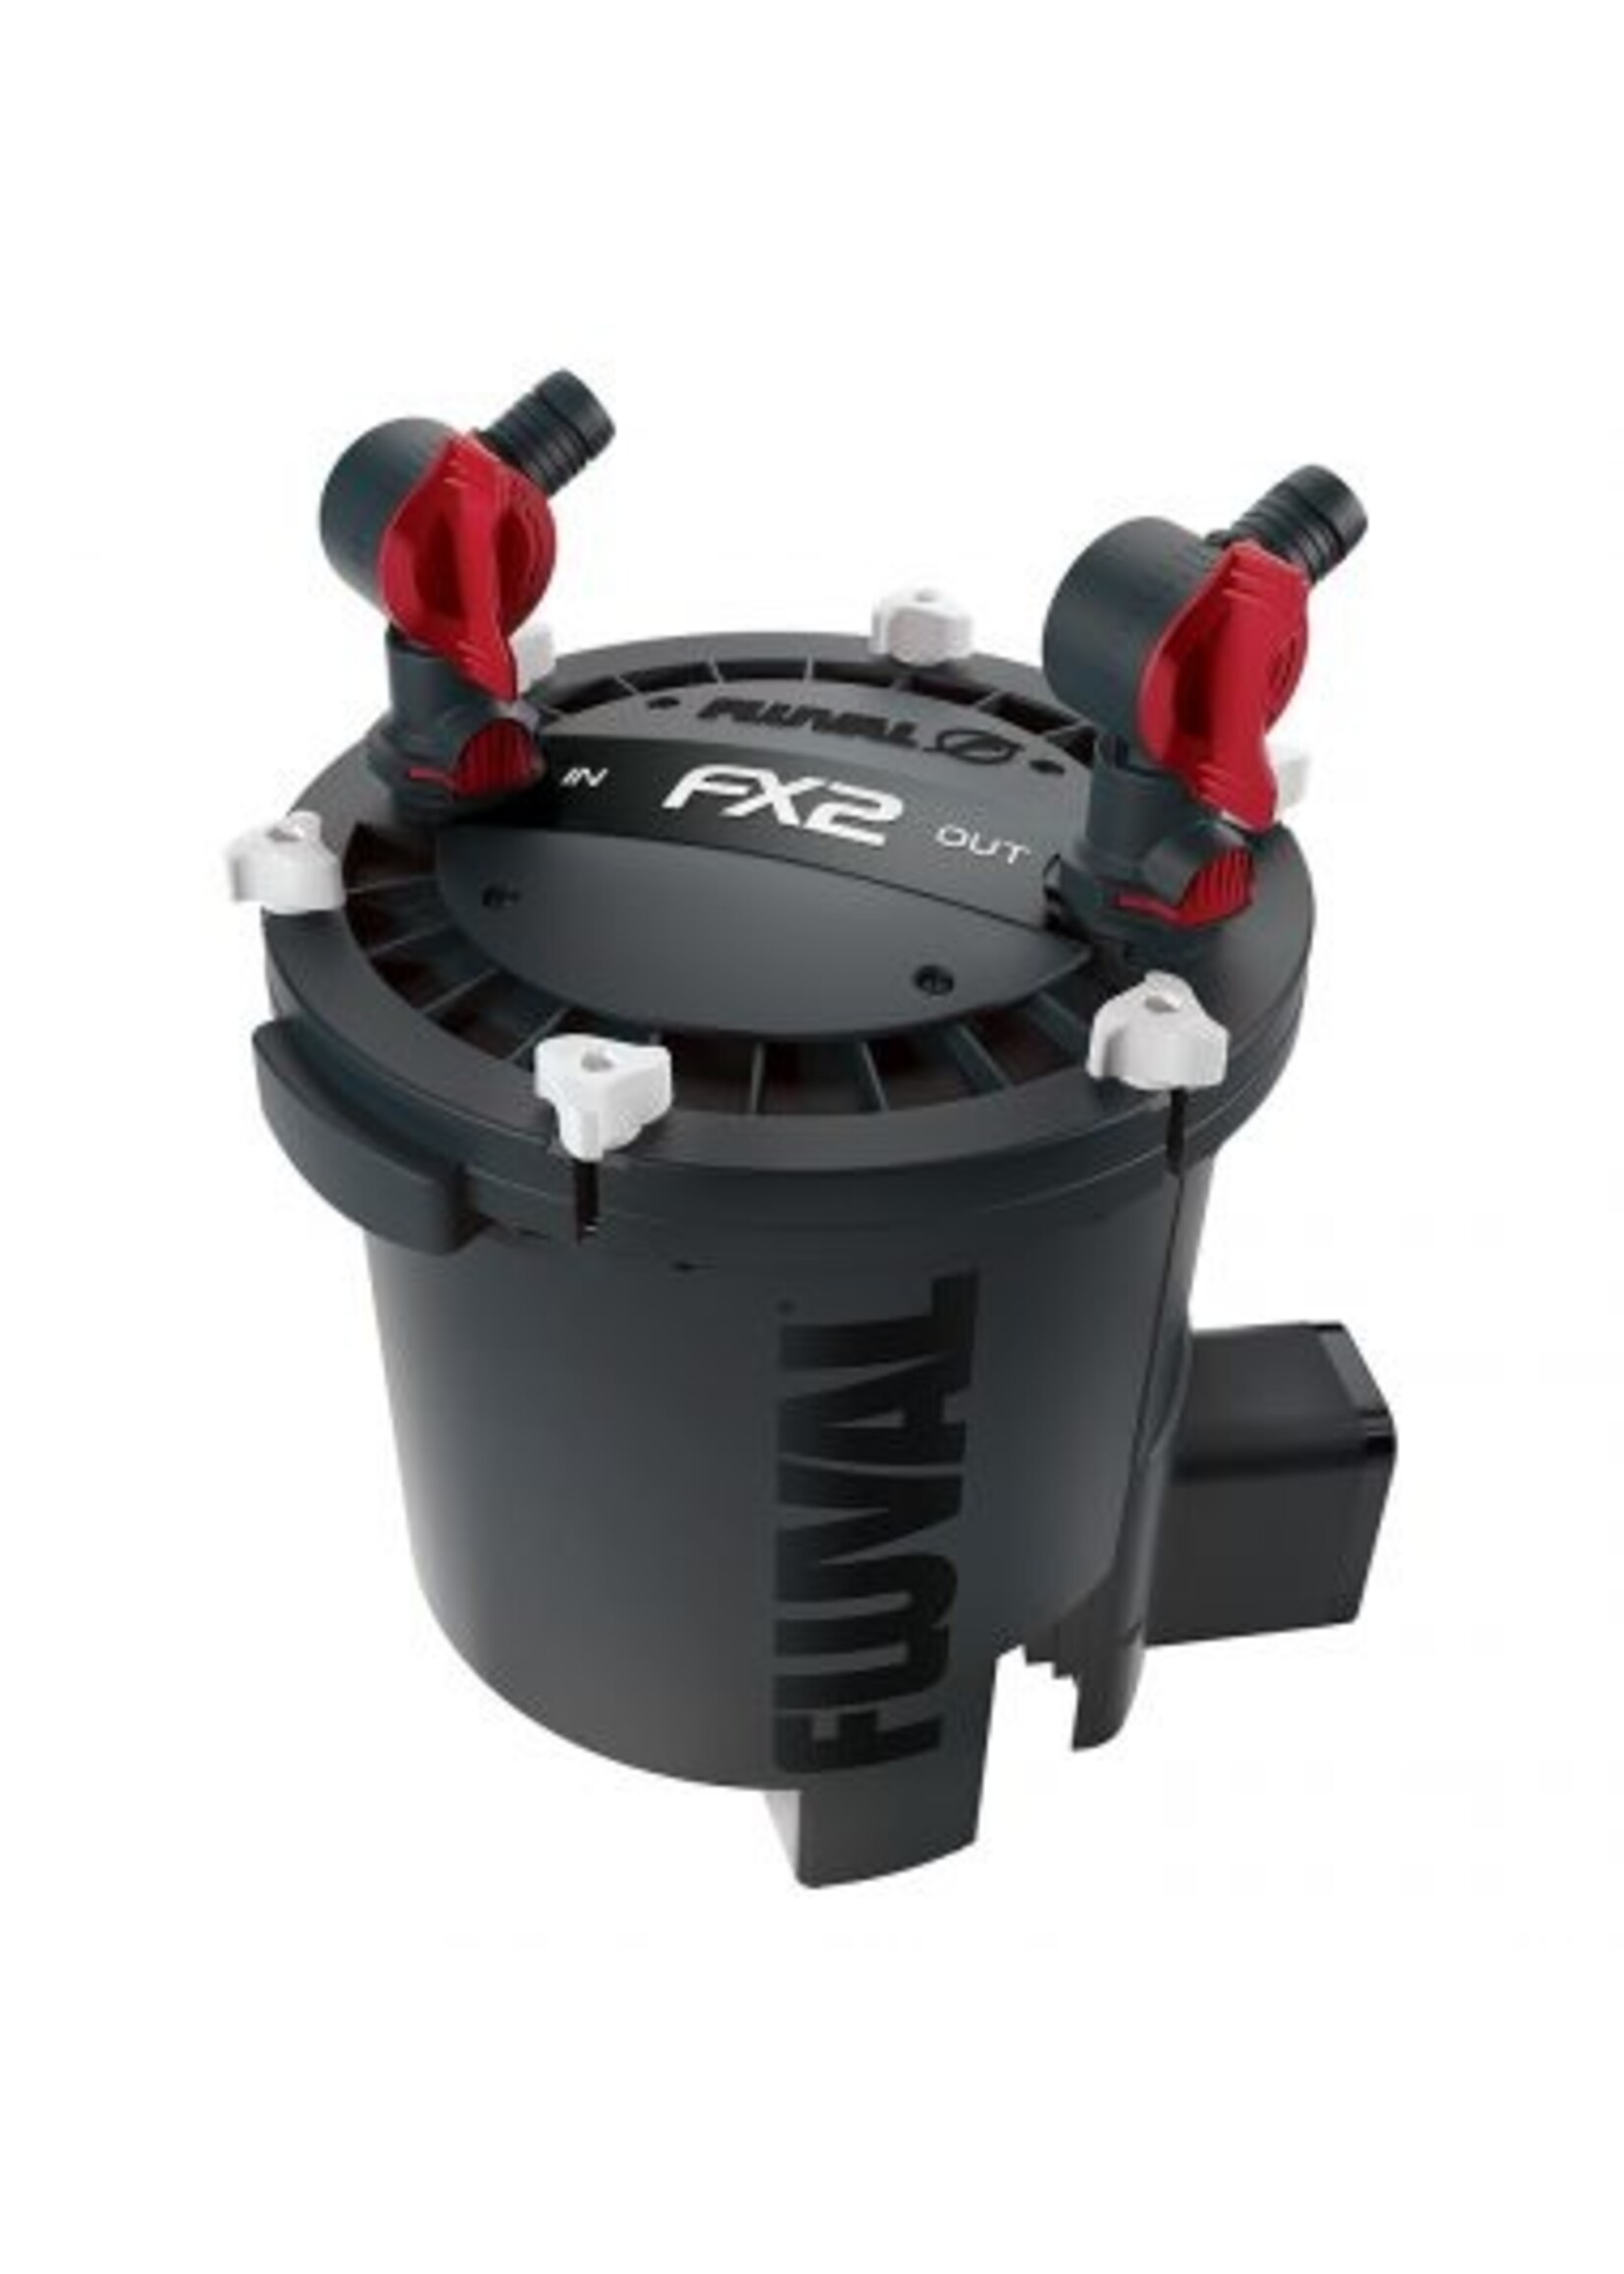 Fluval Fluval FX2 High Performance Canister Filter up to 750 L (175us gal)